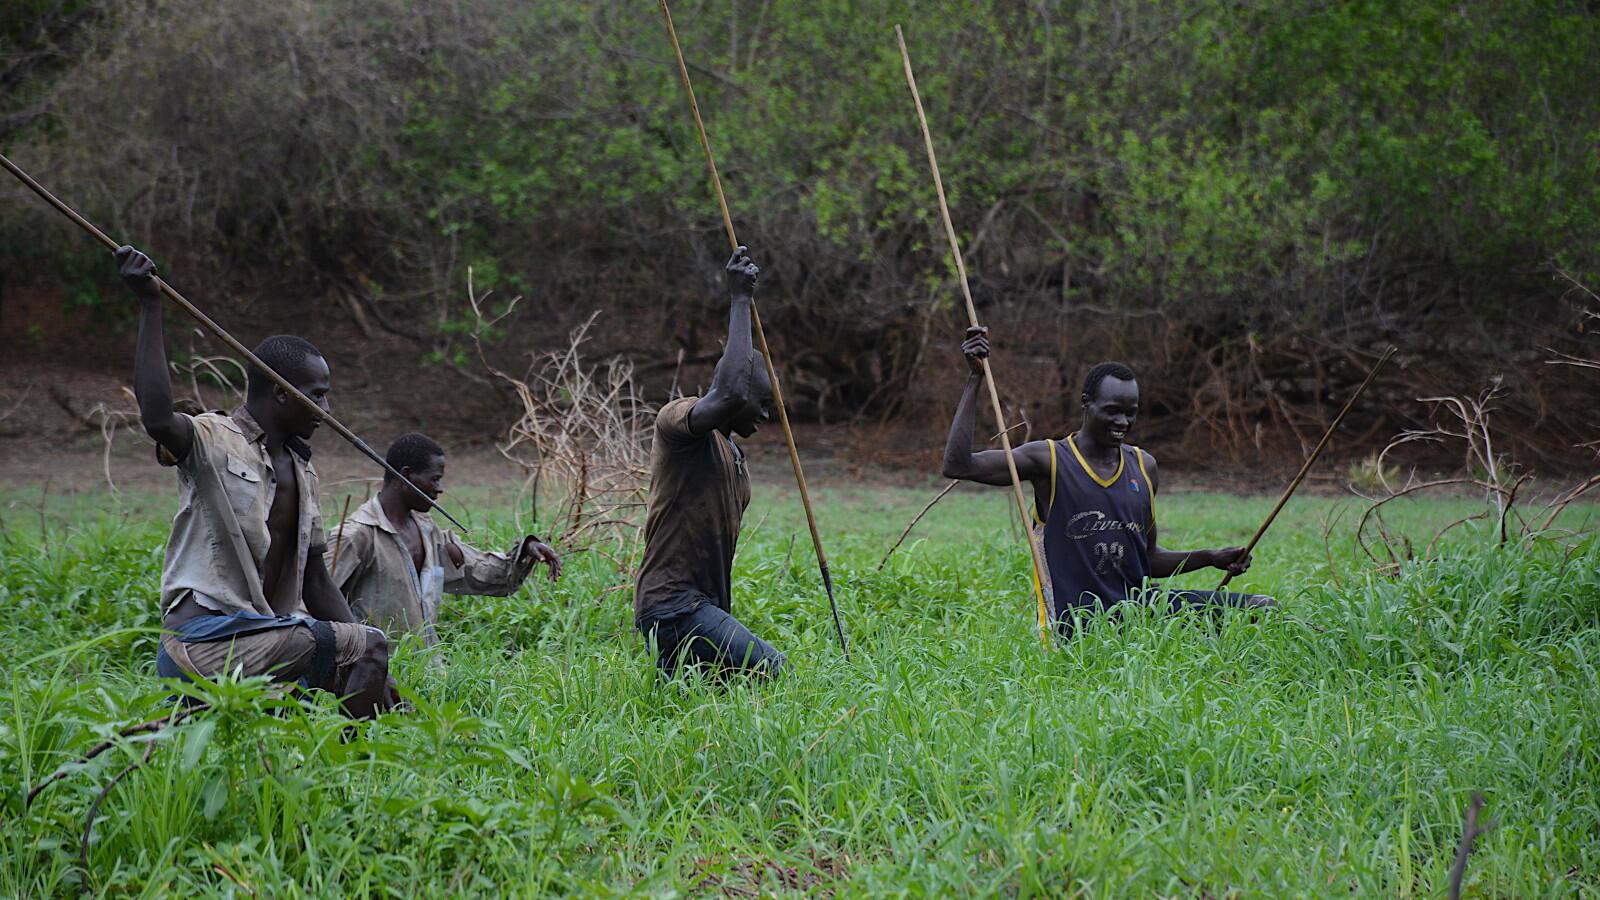 Opo men fishing with spears.